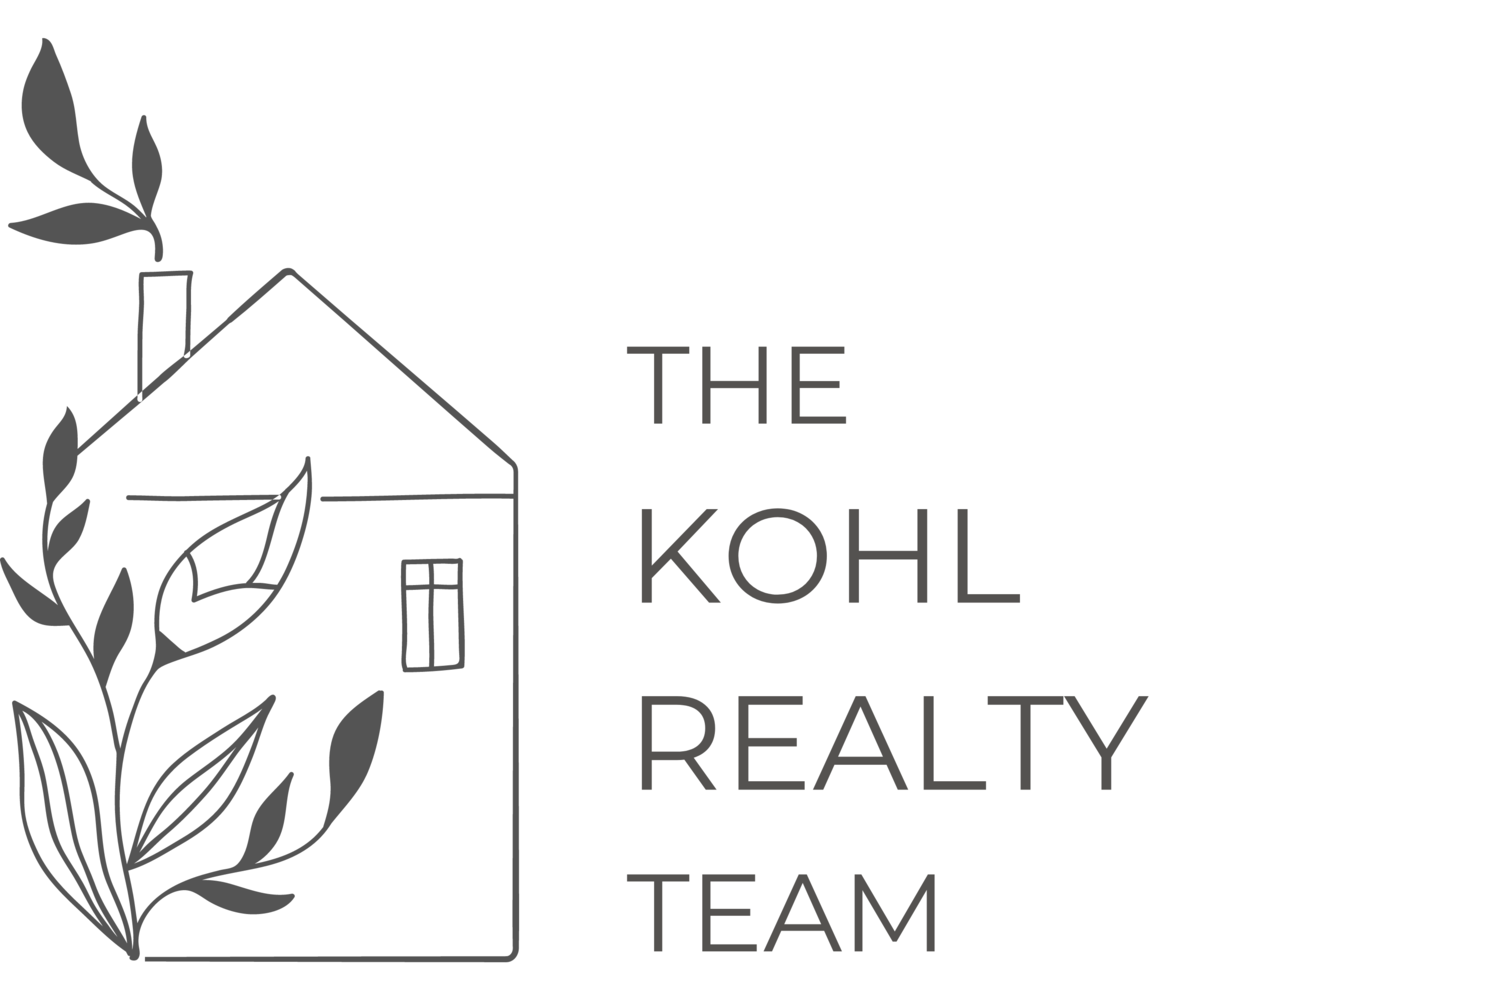 The Kohl Realty Team